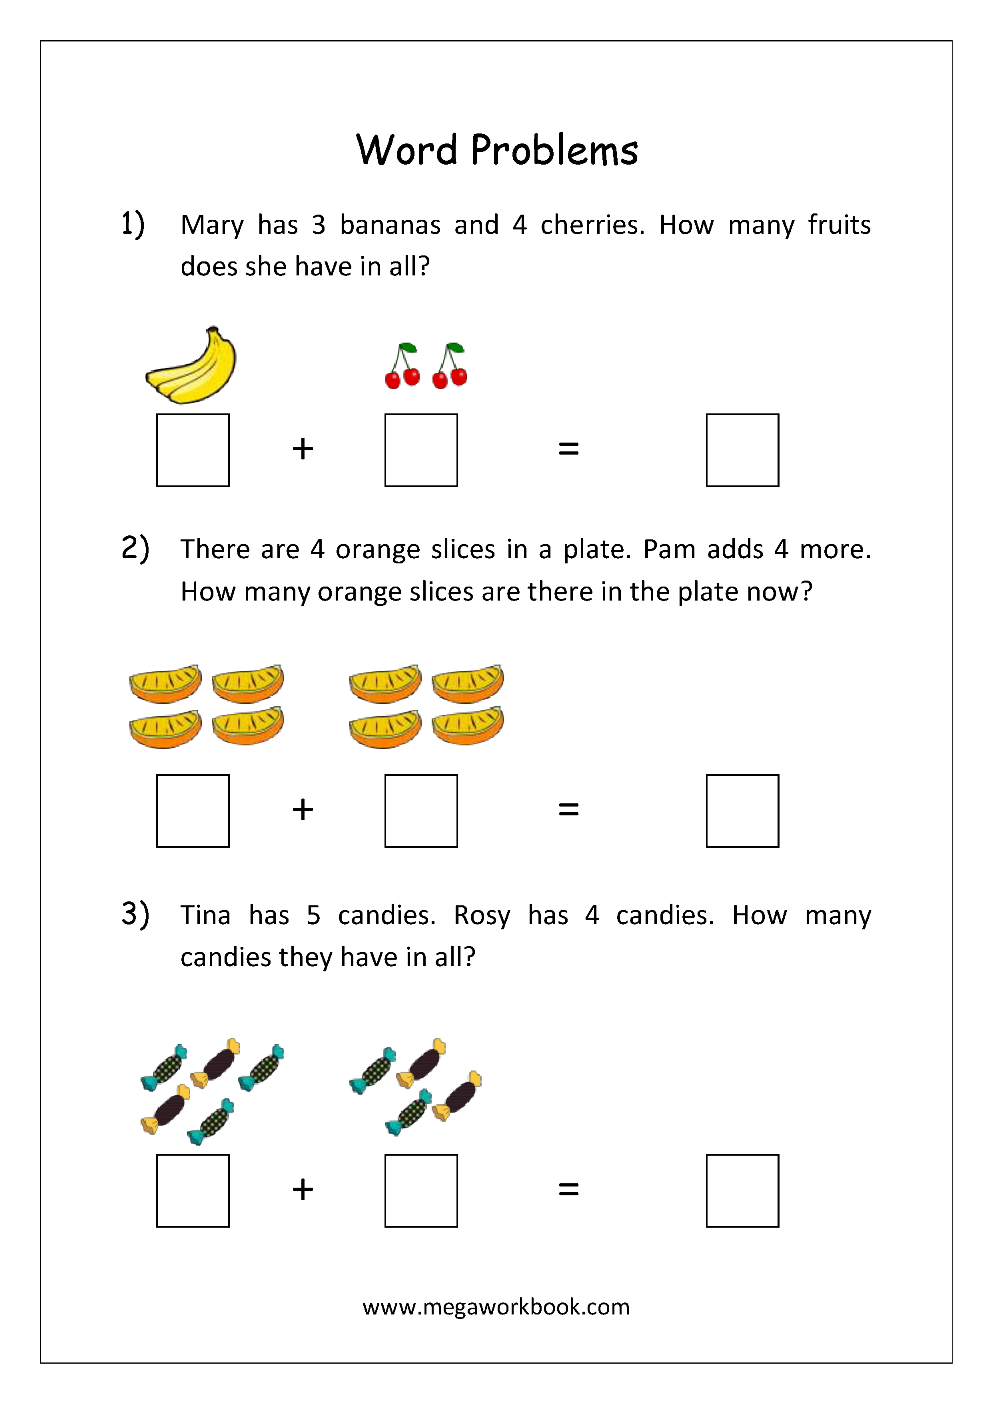 Addition And Subtraction Word Problems Worksheets For Kindergarten And Grade 1 - Story Sums - Story Problems - Megaworkbook